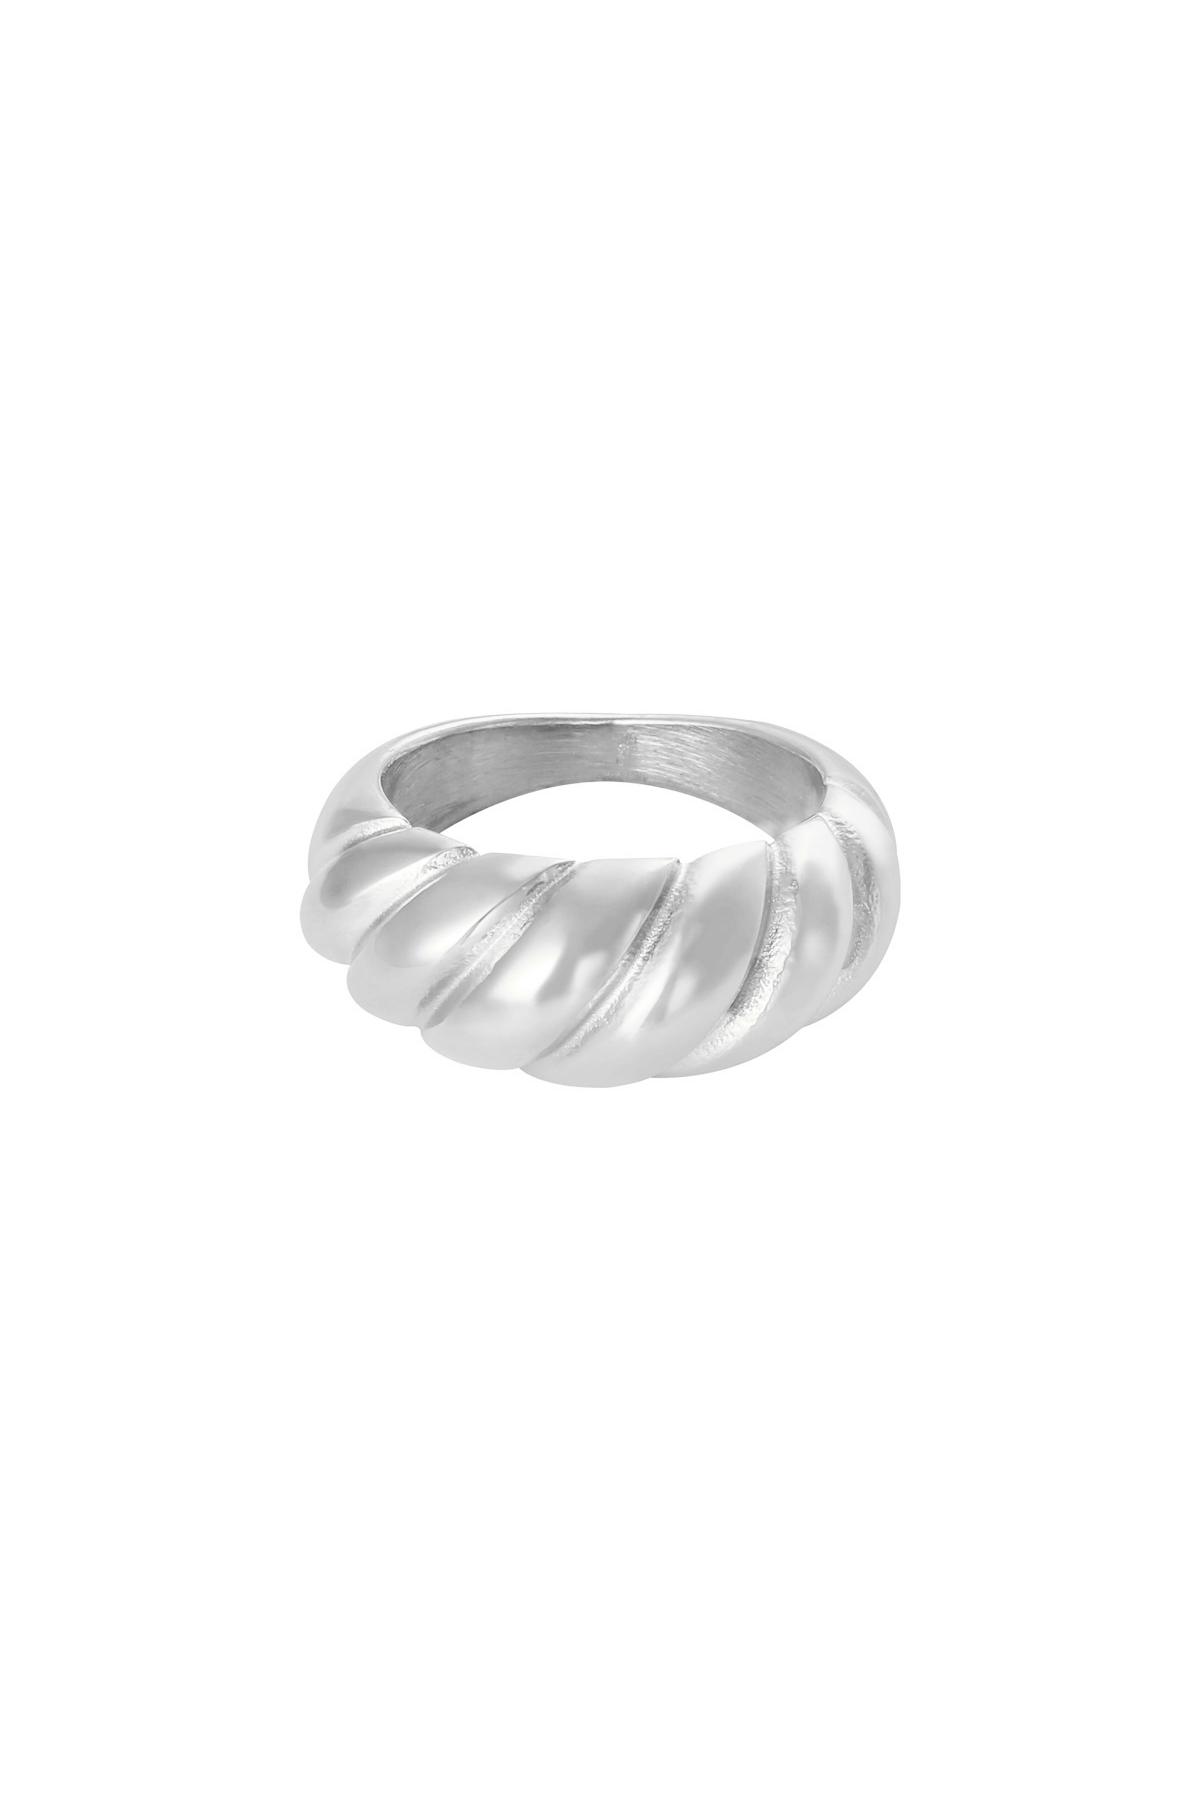 Silver / 16 / Ring Small Baguette Silver Stainless Steel 16 